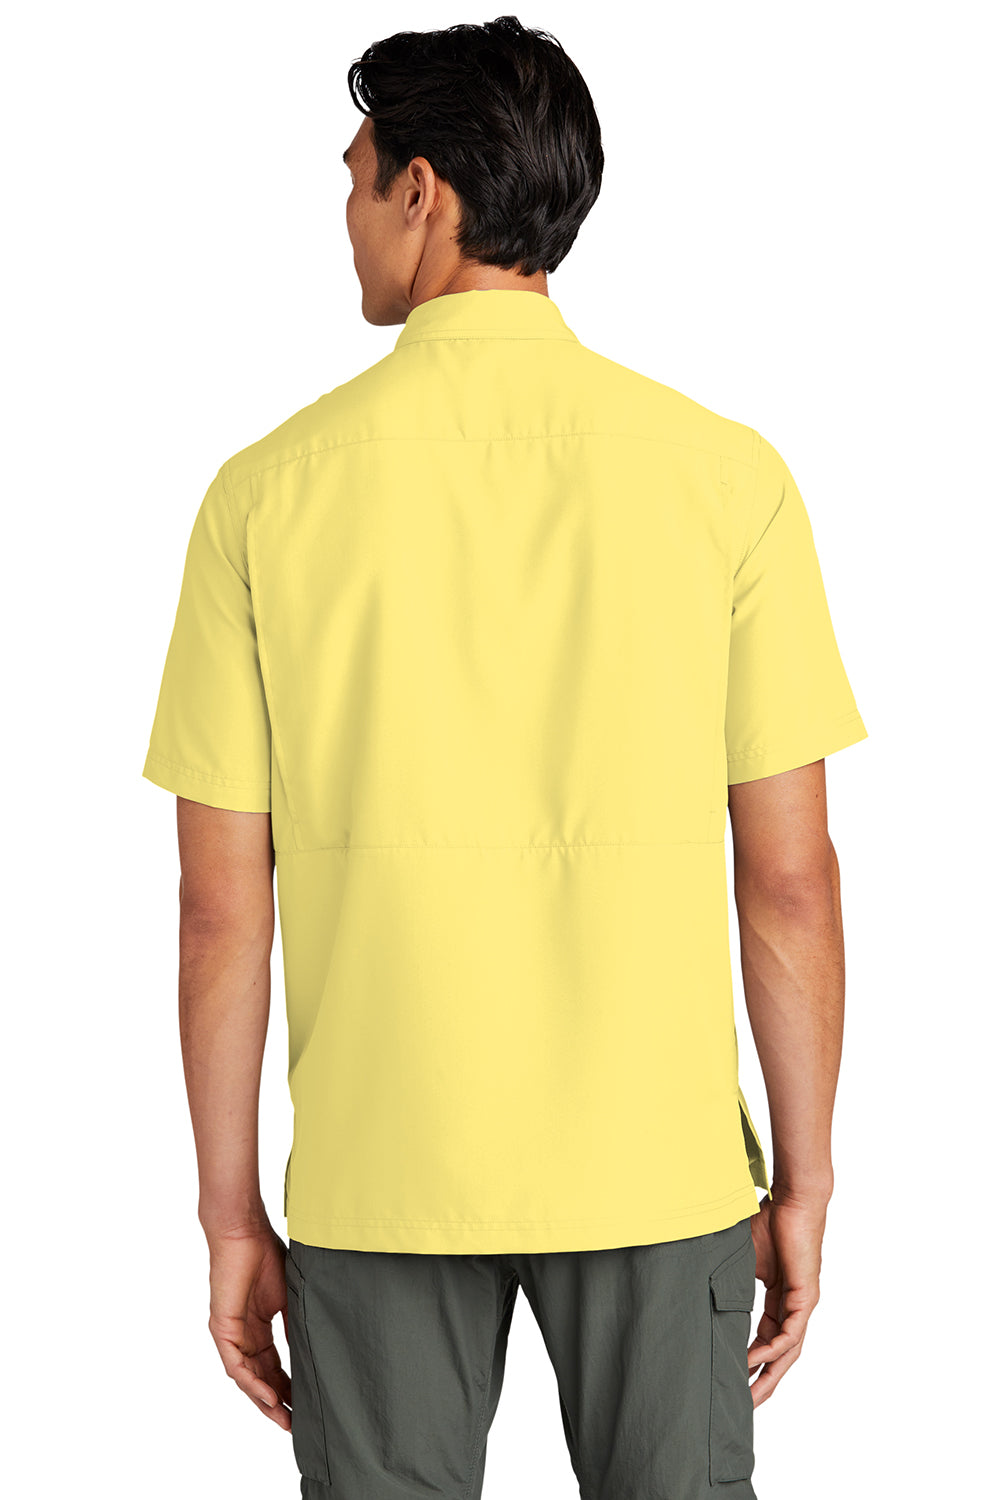 Port Authority W961 Mens Daybreak Moisture Wicking Short Sleeve Button Down Shirt w/ Double Pockets Yellow Back